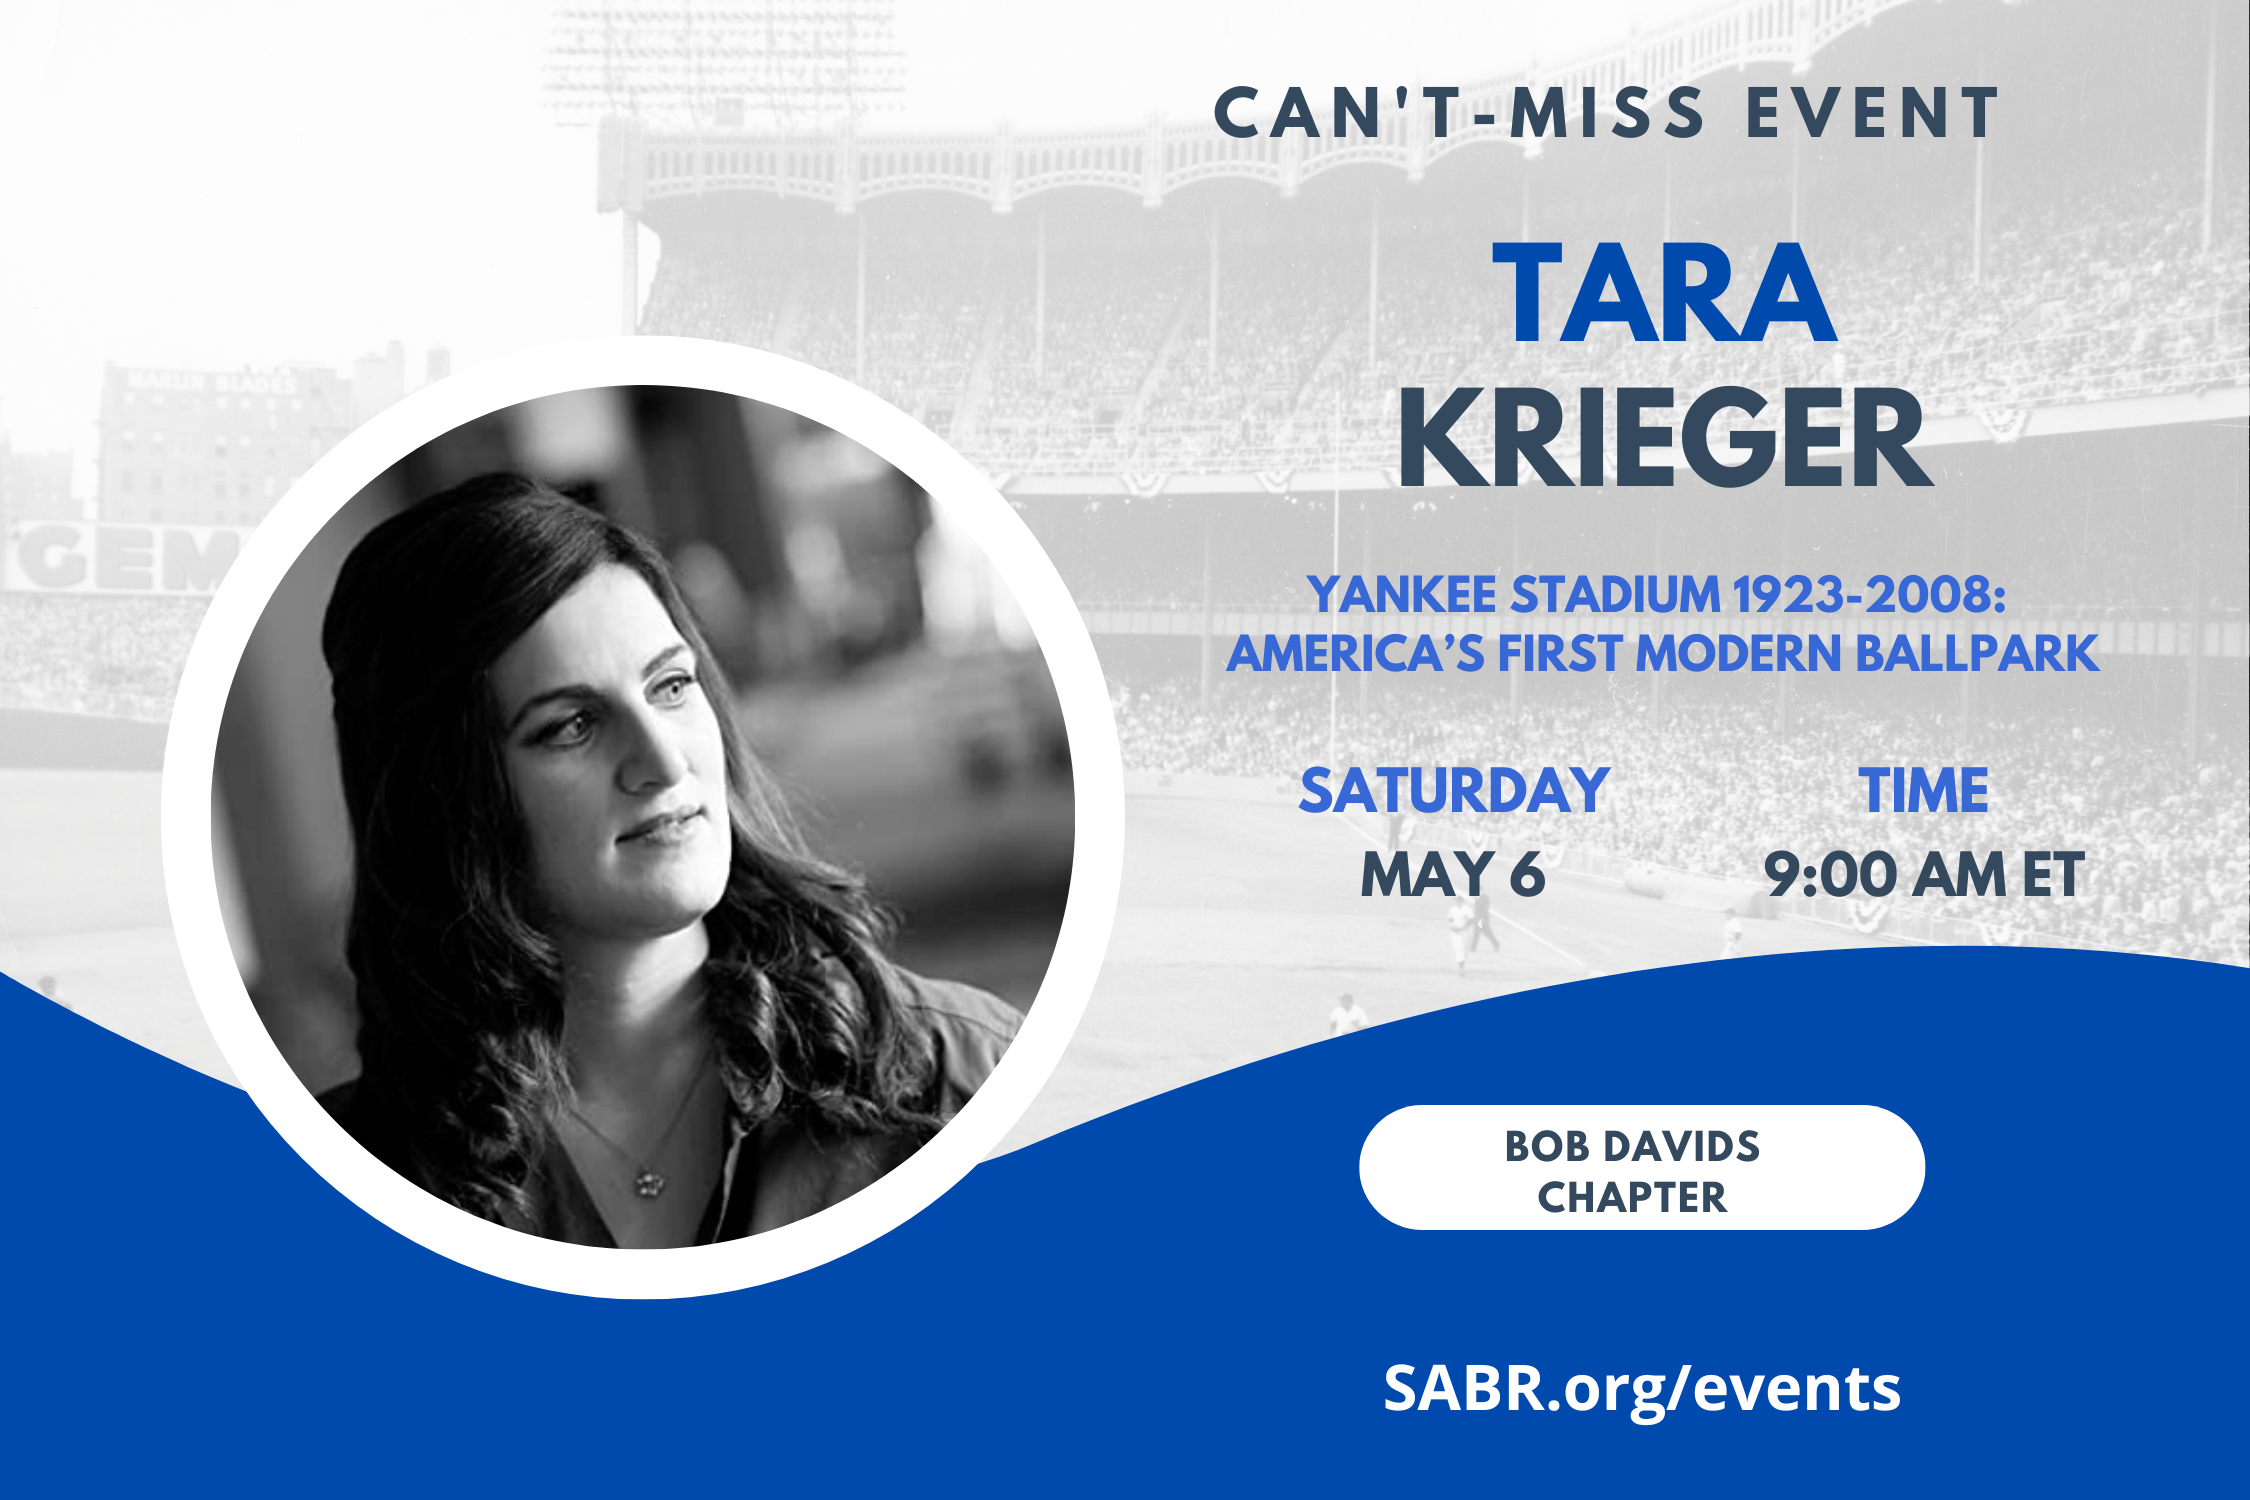 The next "Talkin' Baseball" meeting, hosted by the SABR Bob Davids Chapter in Washington D.C. and surrounding communities in Maryland and Virginia, will be held via Zoom at 9:00 a.m. Eastern on Saturday, May 6, 2023. All baseball fans are welcome to attend. Our speaker will be SABR member Tara Krieger, who will talk about the latest SABR book "Yankee Stadium 1923-2008: America’s First Modern Ballpark".